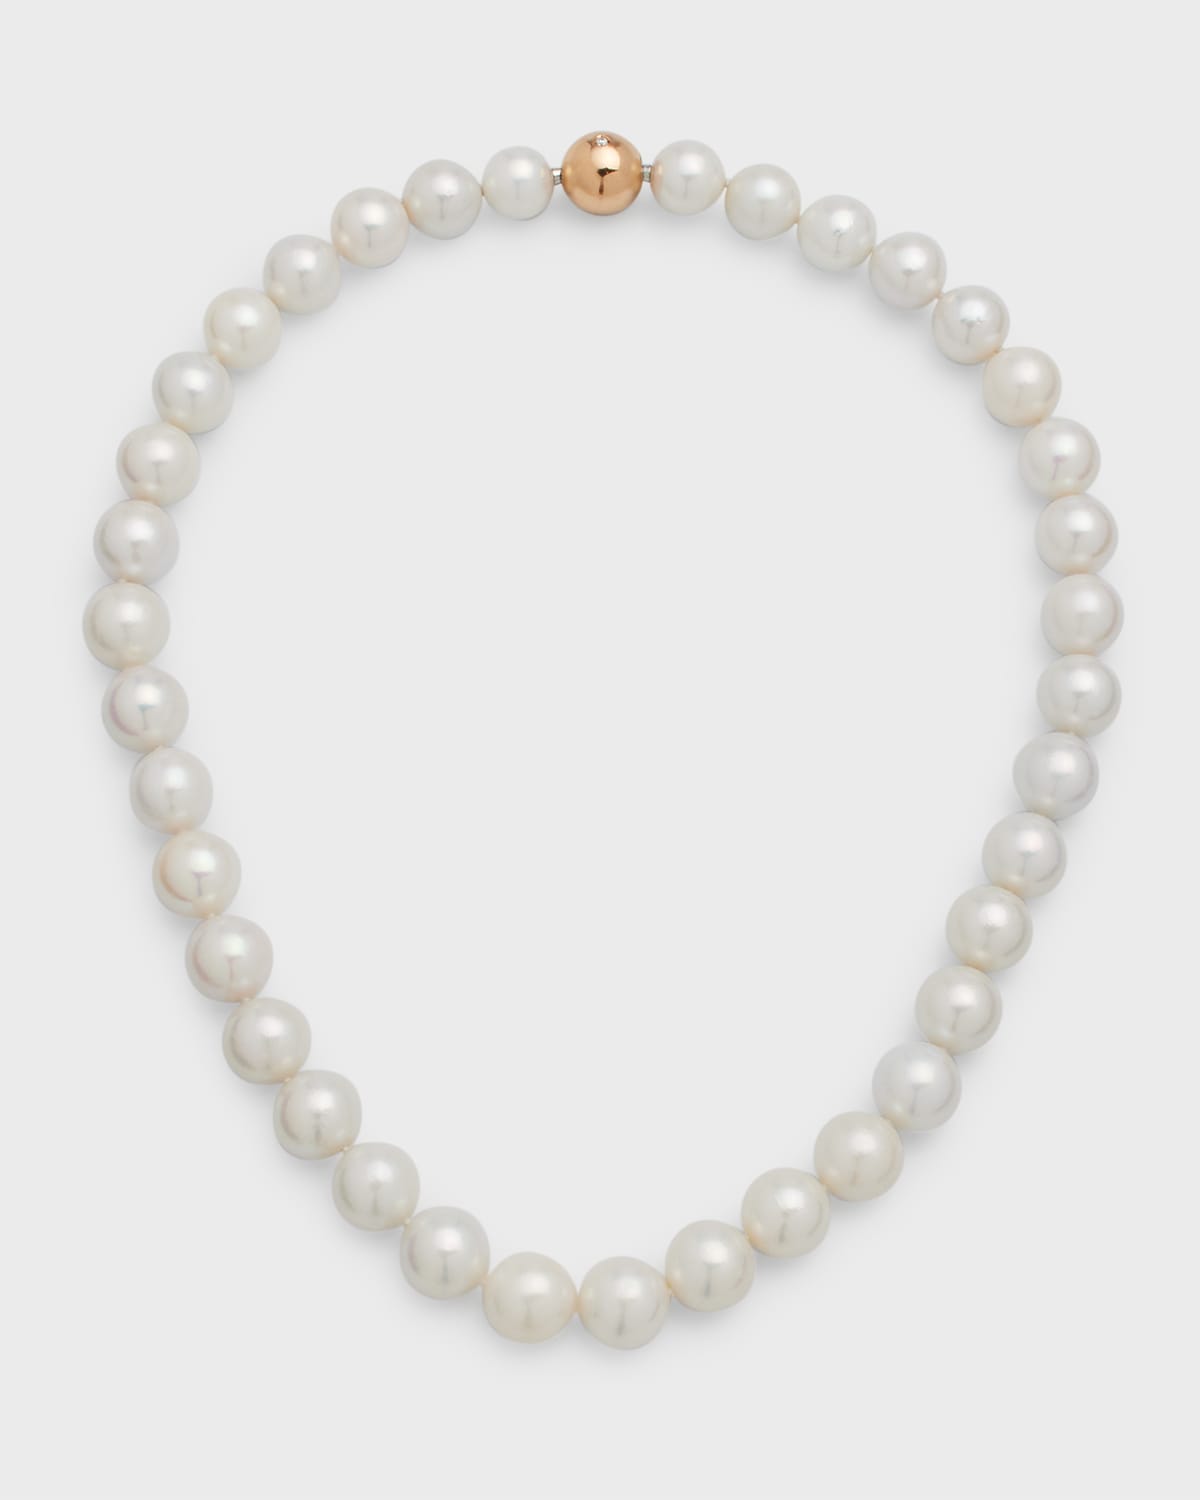 Utopia Freshwater Pearl Short Necklace, 10-12mm